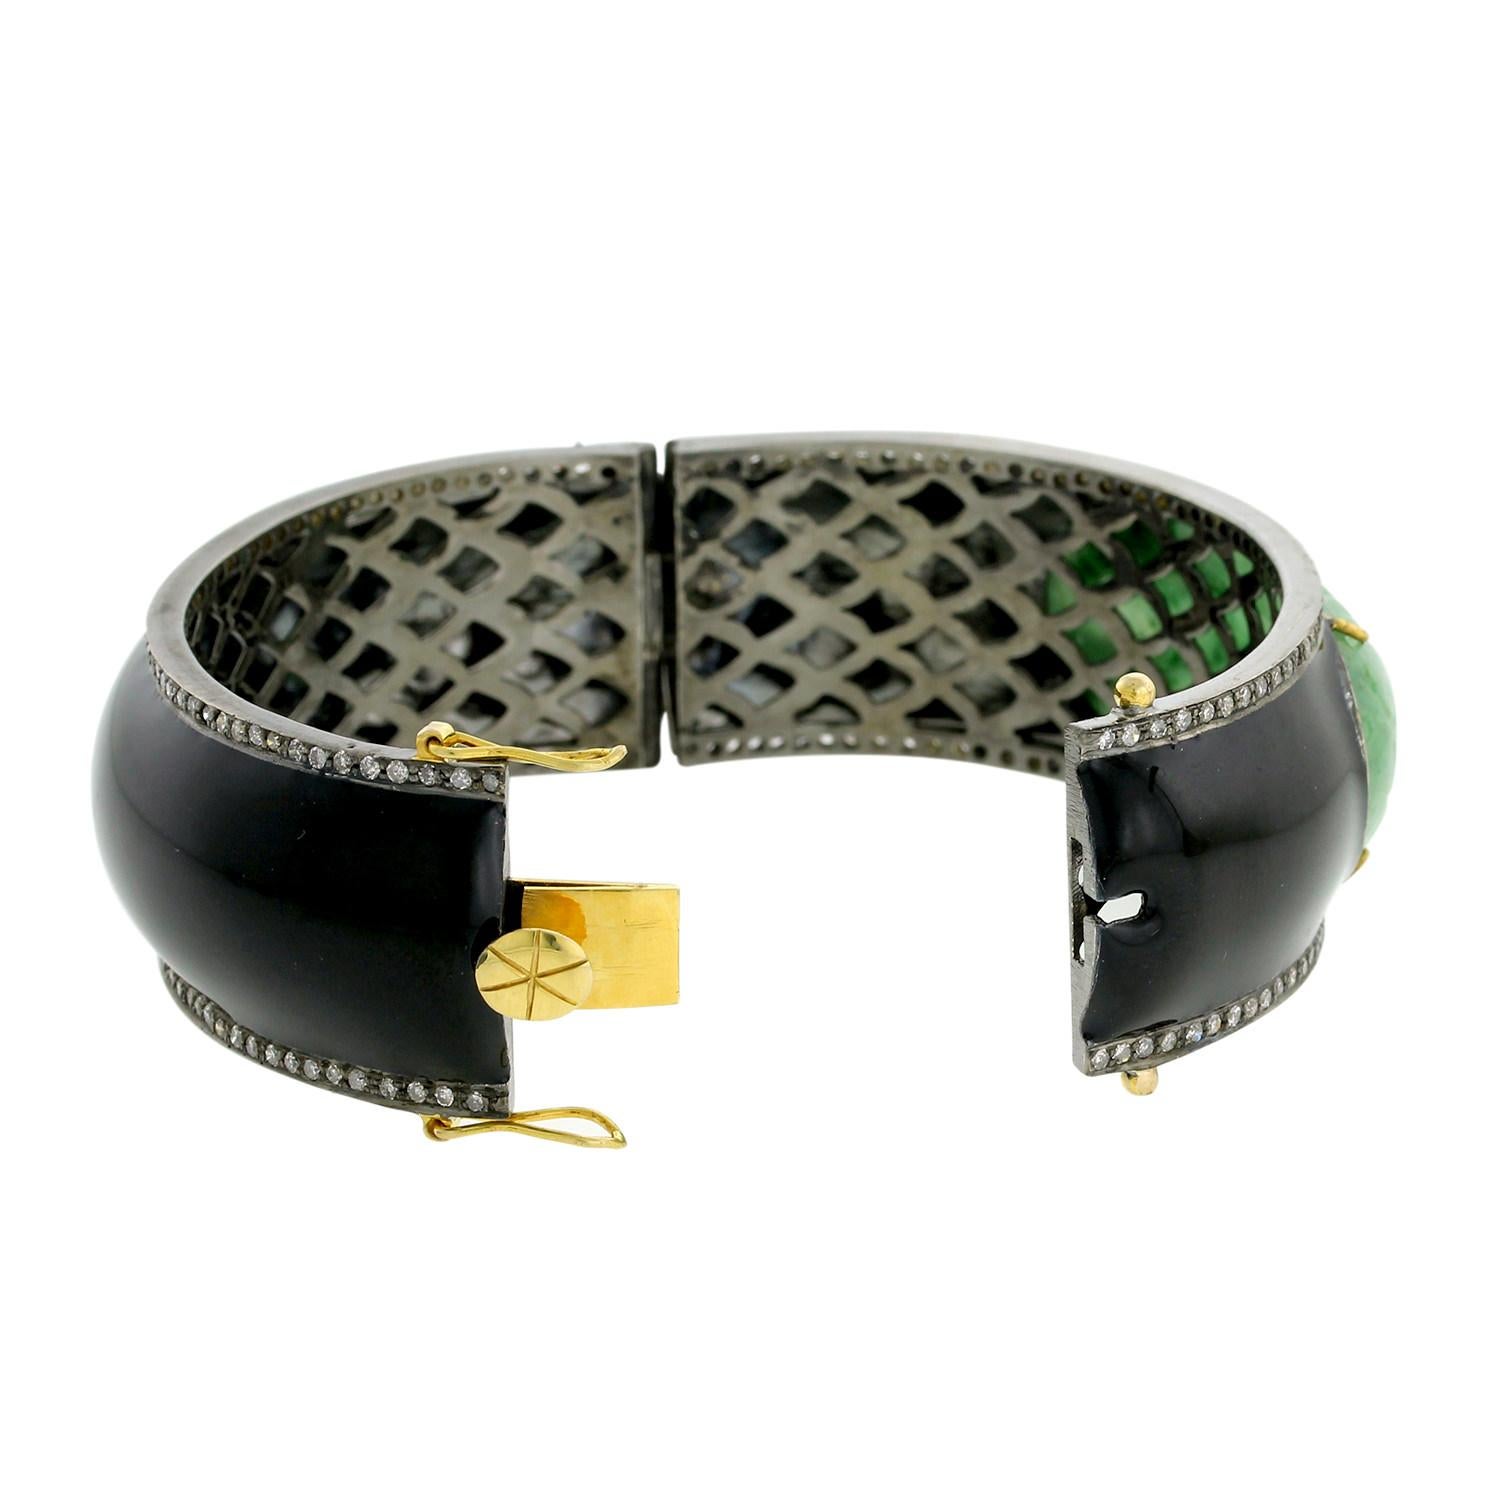 Jade Black Enamel Bangle in silver with Diamonds

Closure: 

18kt: 3.83gms
Diamond: 2.31cts
Silver: 40.15gms
Jade:36.50cts